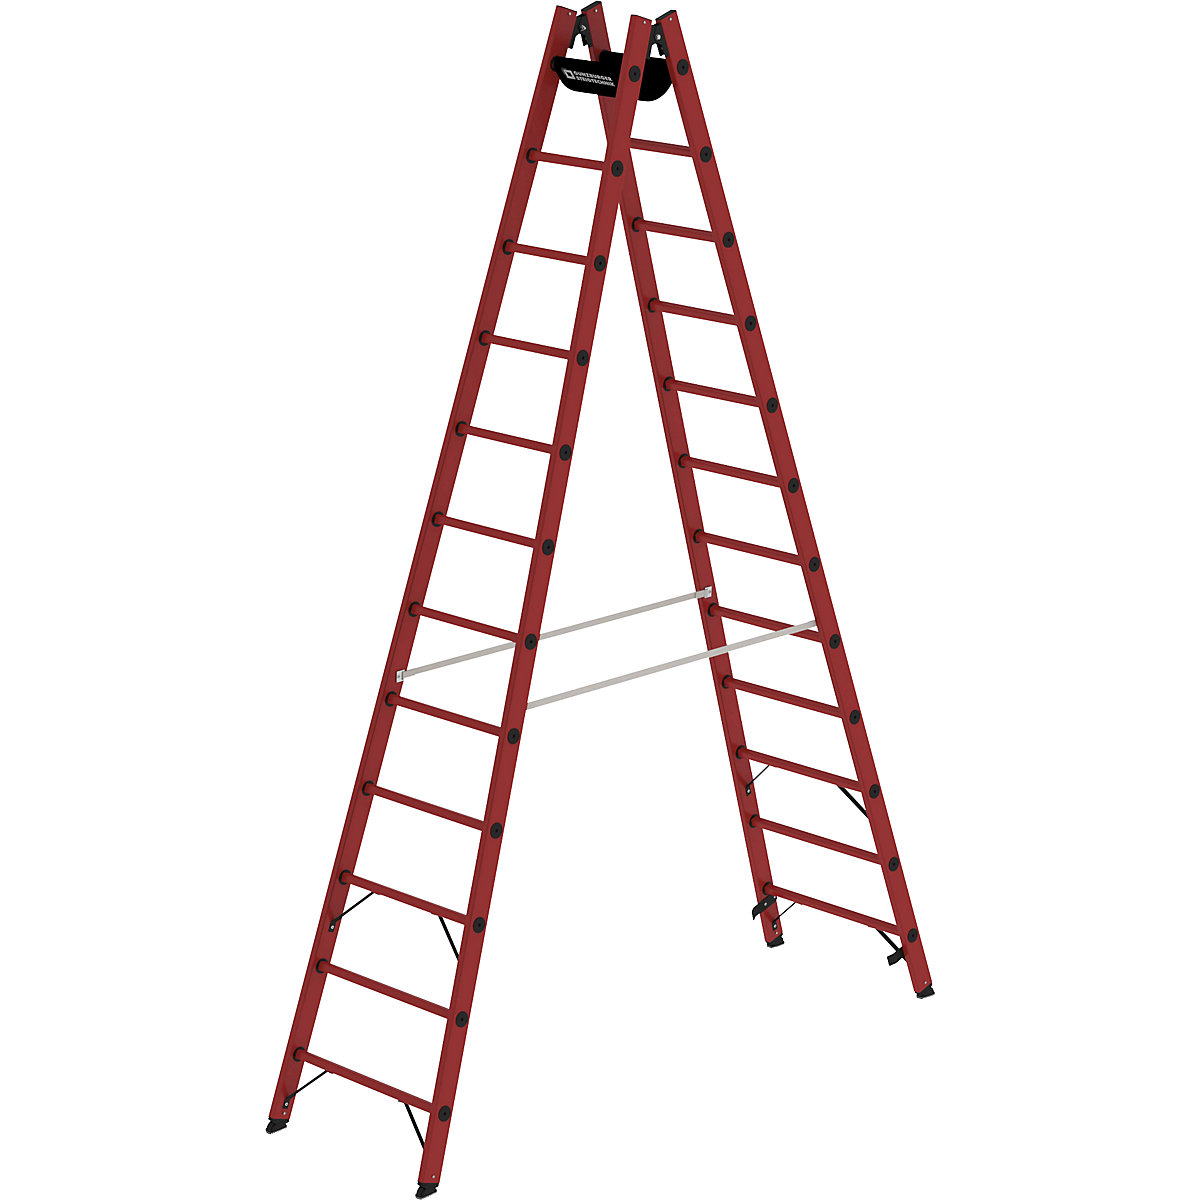 Solid plastic ladder – MUNK, made entirely of GRP, 2 x 12 rungs-5